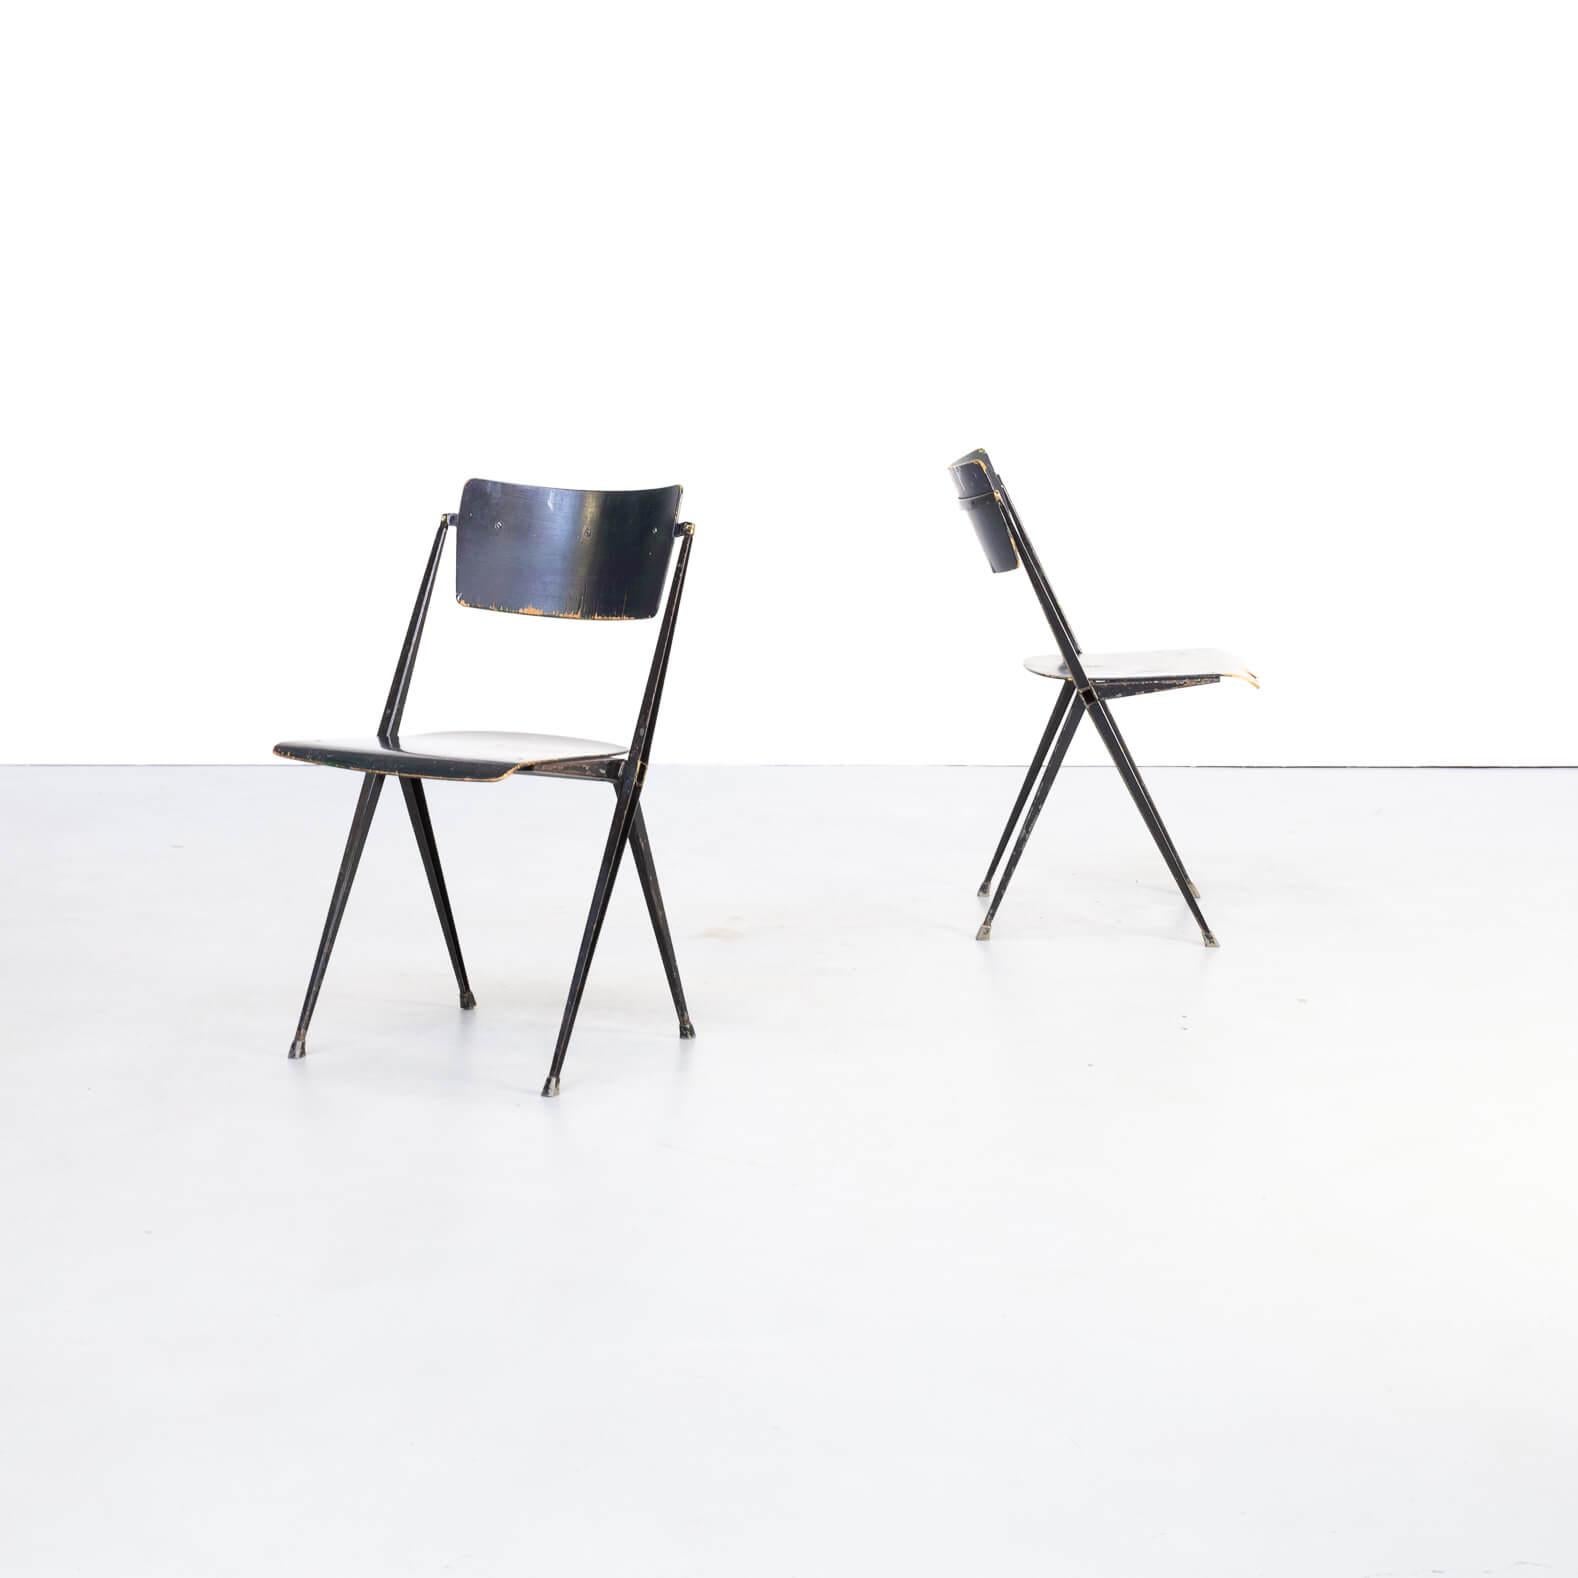 In 1958, Rietveld left the Gispen and moved to Ahrend de Cirkel, where he began a fruitful collaboration with leading Dutch designer Friso Kramer. Together they produced a number of now-iconic designs, including the results chair (1958) and reply